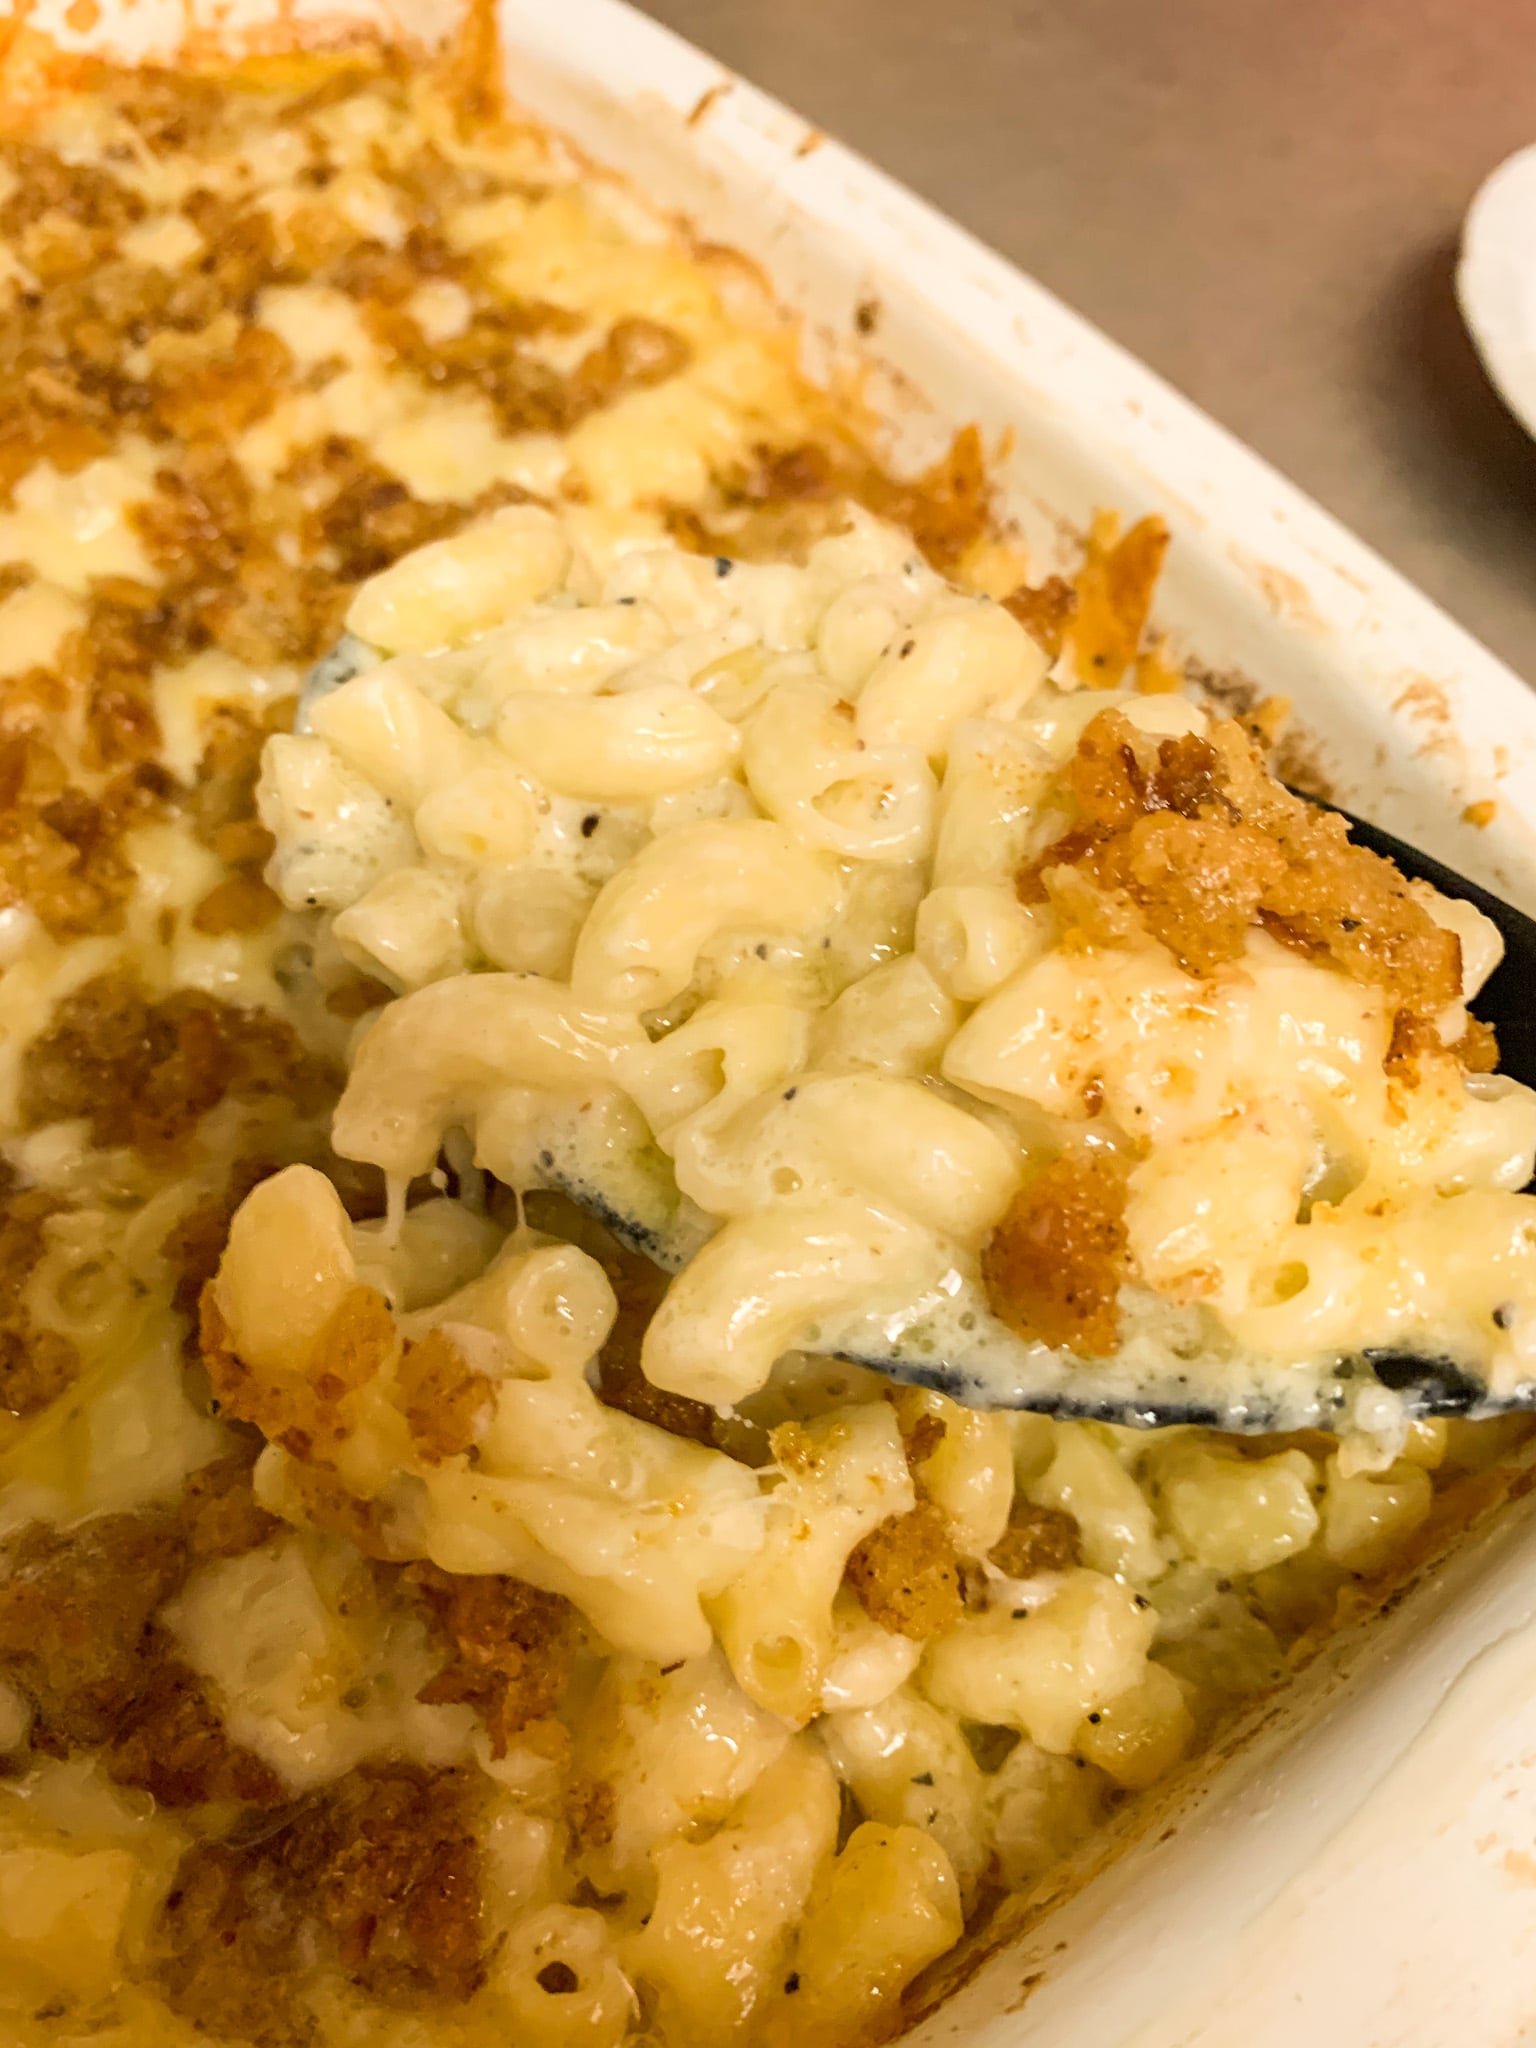 Ina Garten's Overnight Mac and Cheese Recipe With Photos | POPSUGAR Food